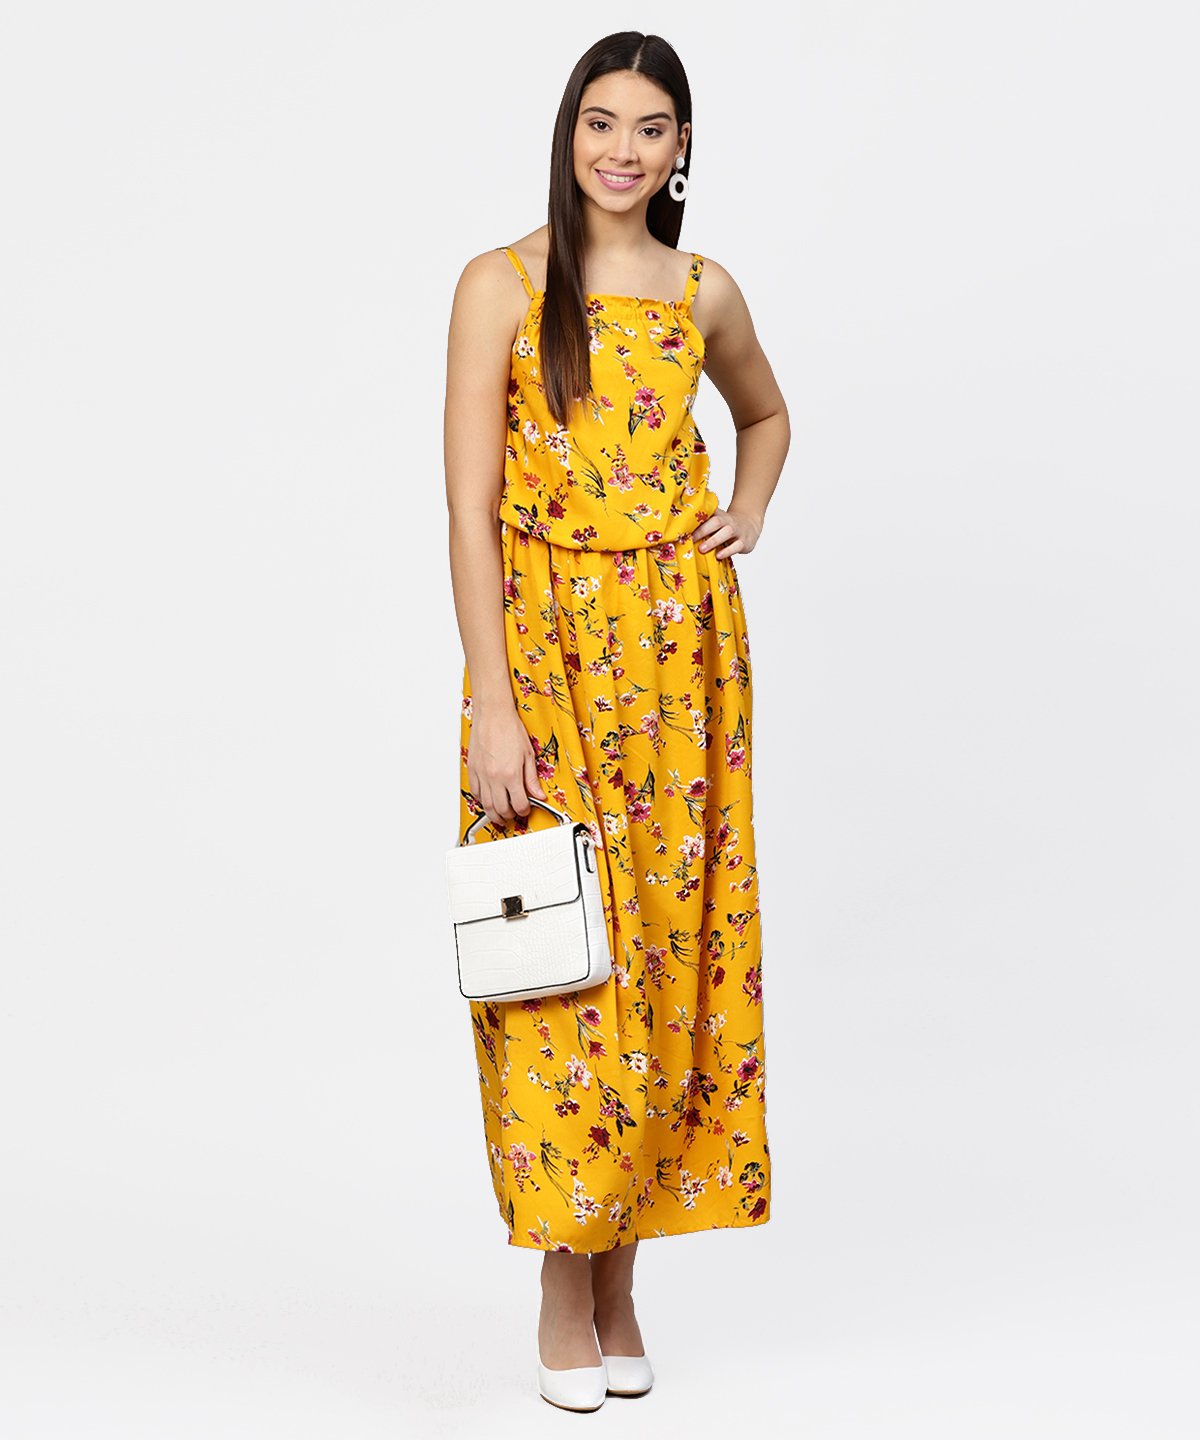 Women's Yellow Printed Shoulder Strapped With A Gather Neckline Maxi Dress - Nayo Clothing